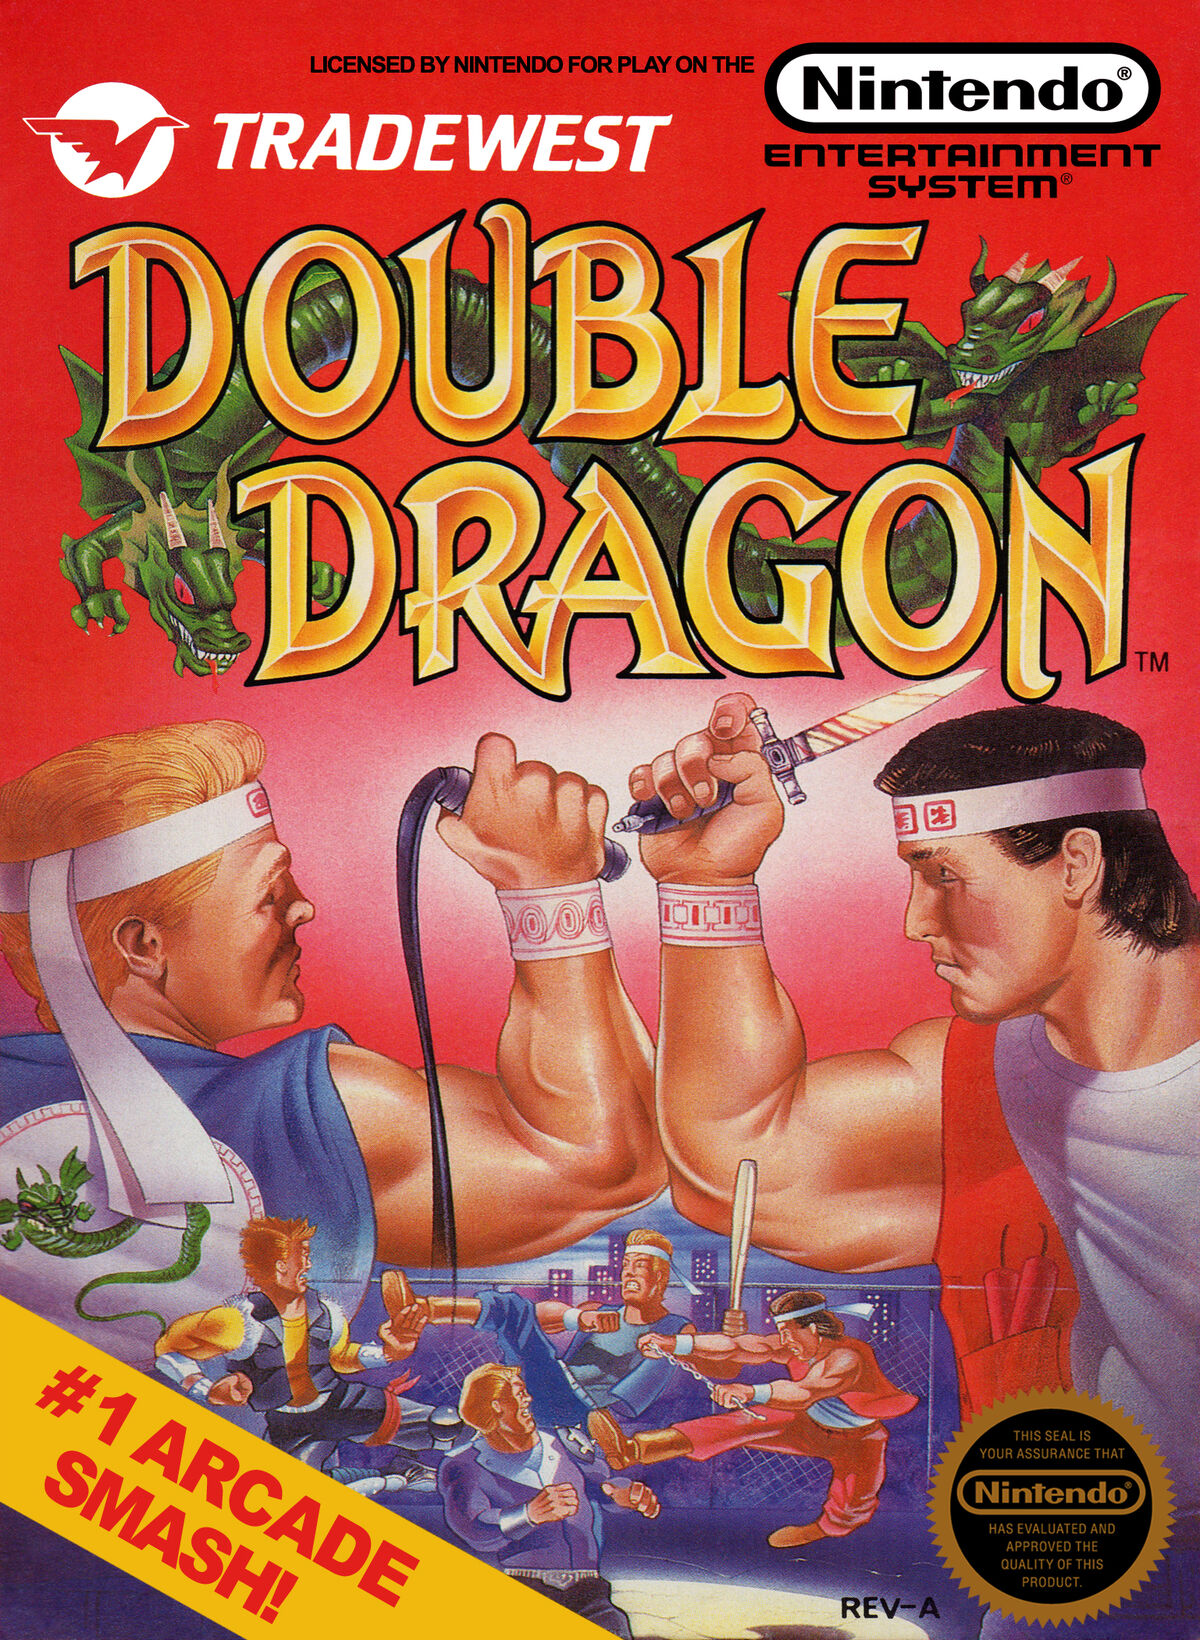 Switch is getting Arcade Archives Double Dragon II: The Revenge this week